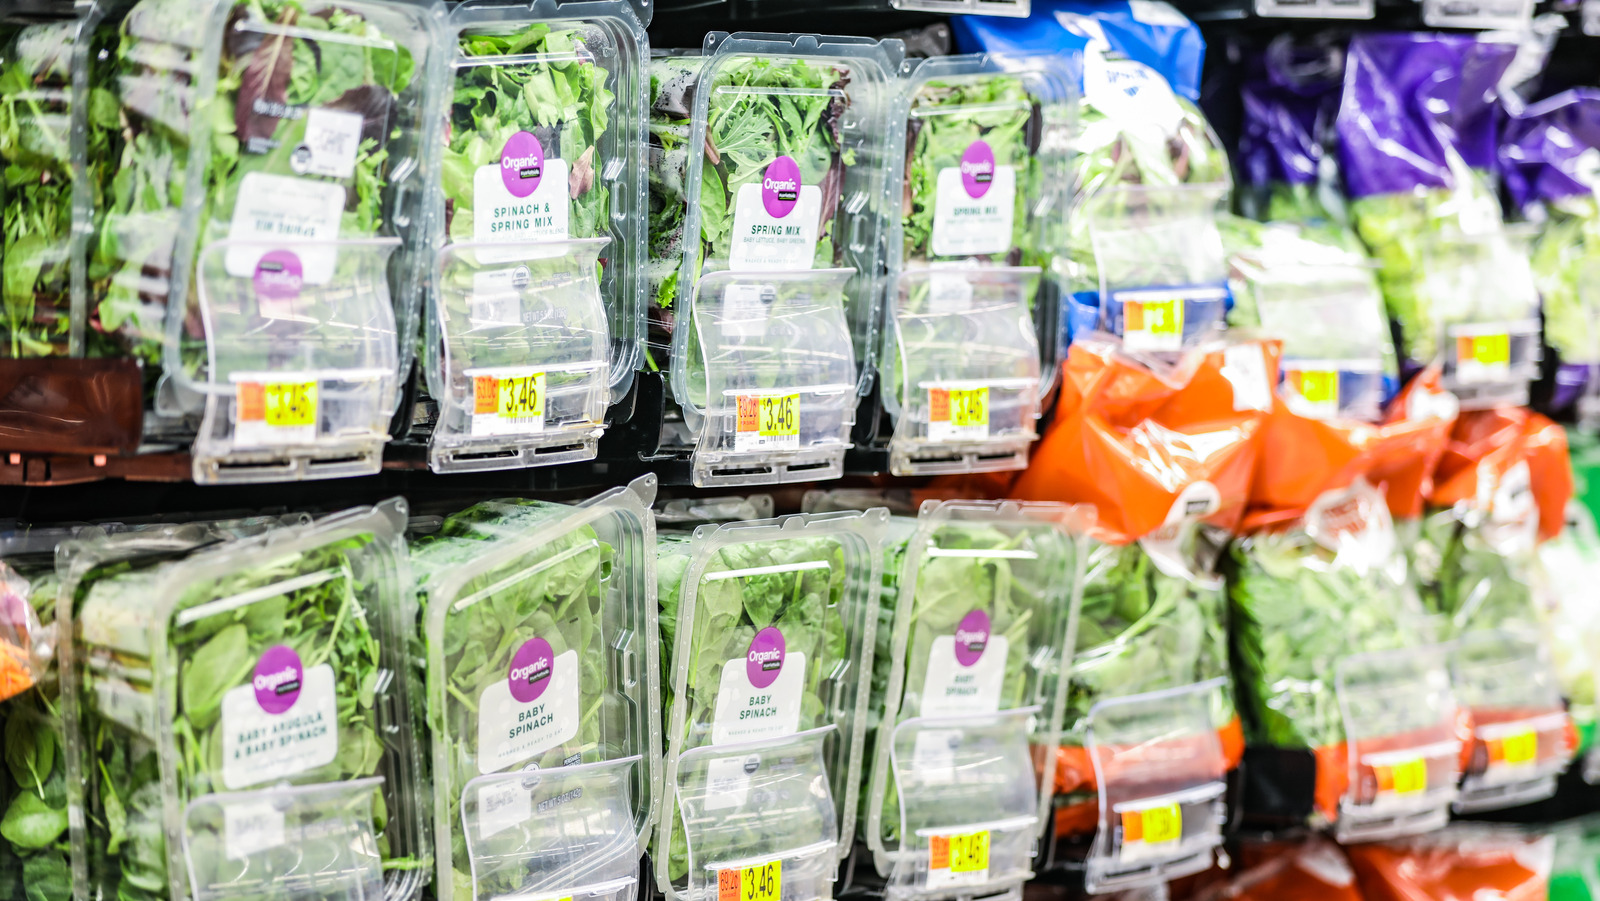 Meijer premade salad kits recalled over possible listeria contamination